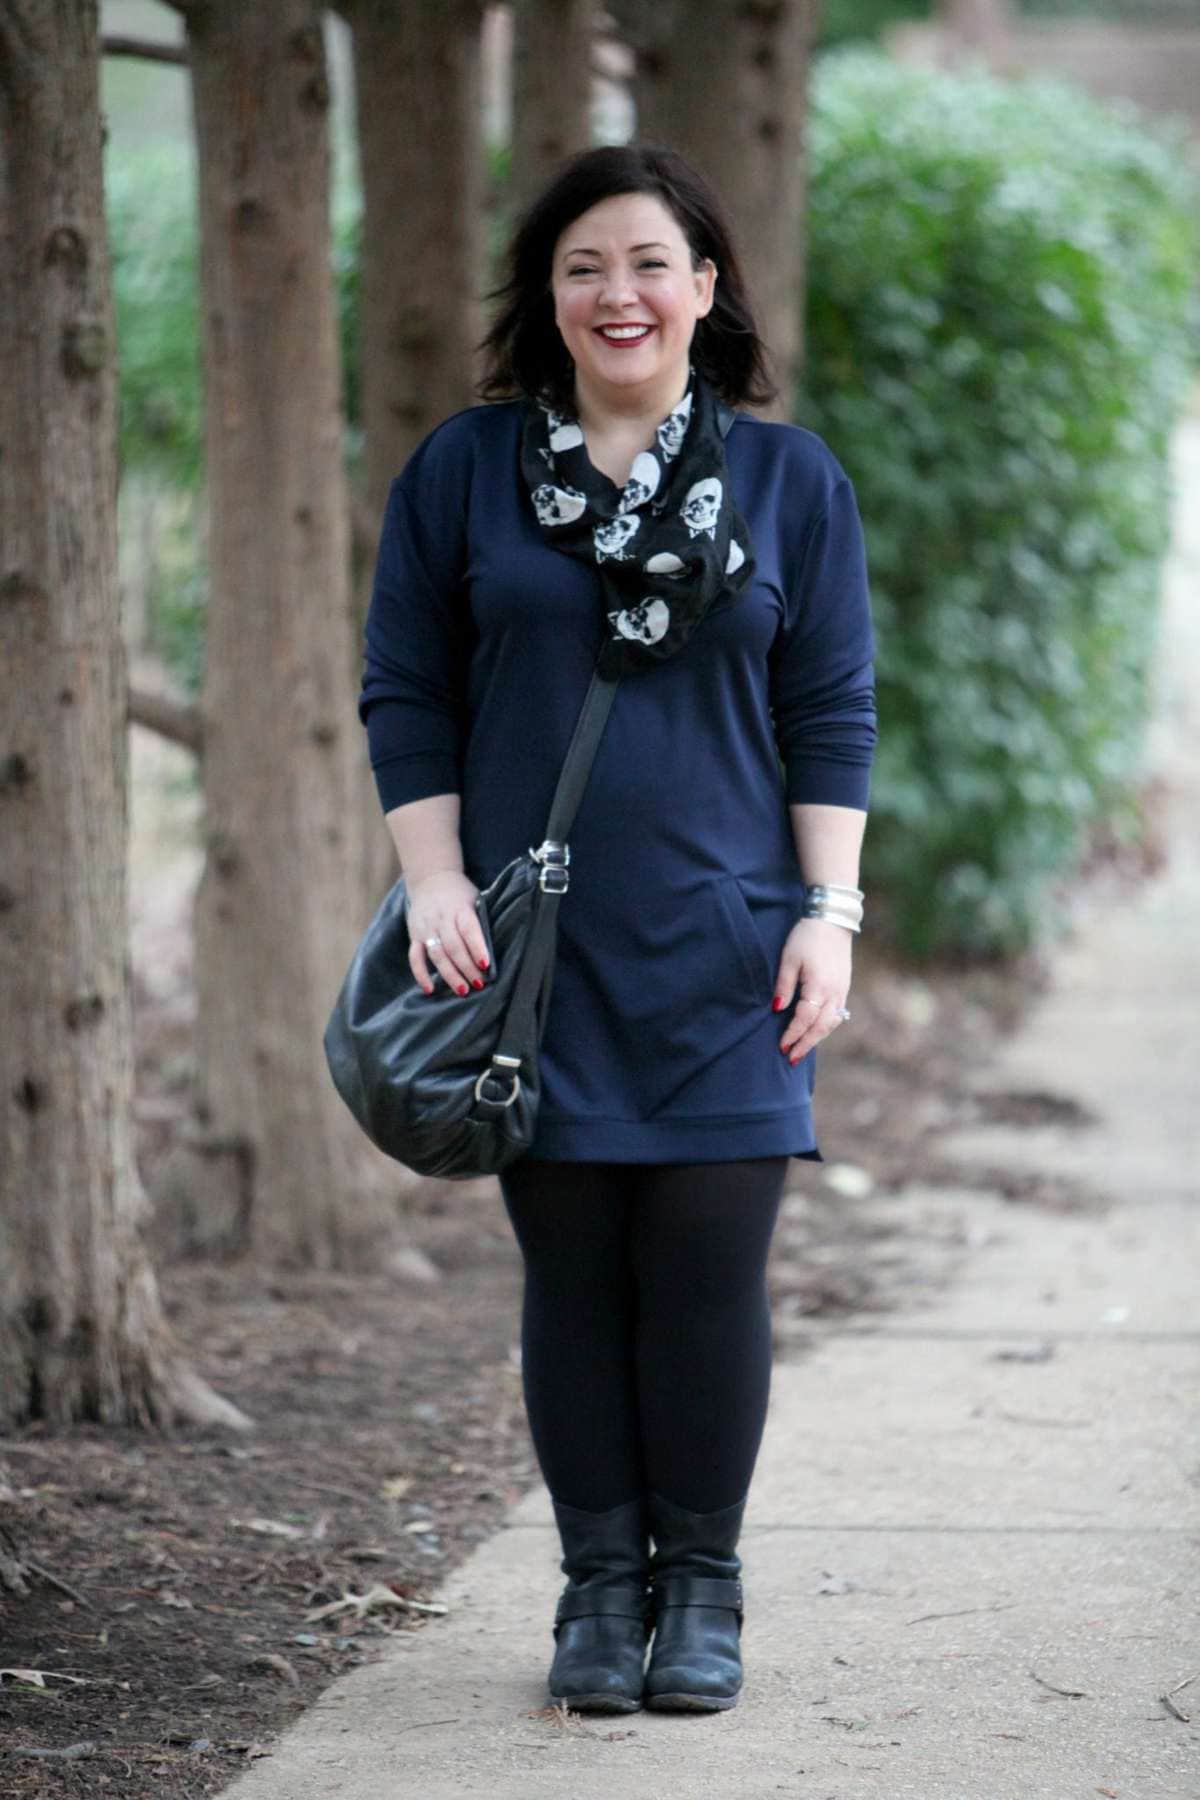 Wardrobe Oxygen, an over 40 fashion and personal style blog, featuring a navy sweatshirt dress and black harness boots